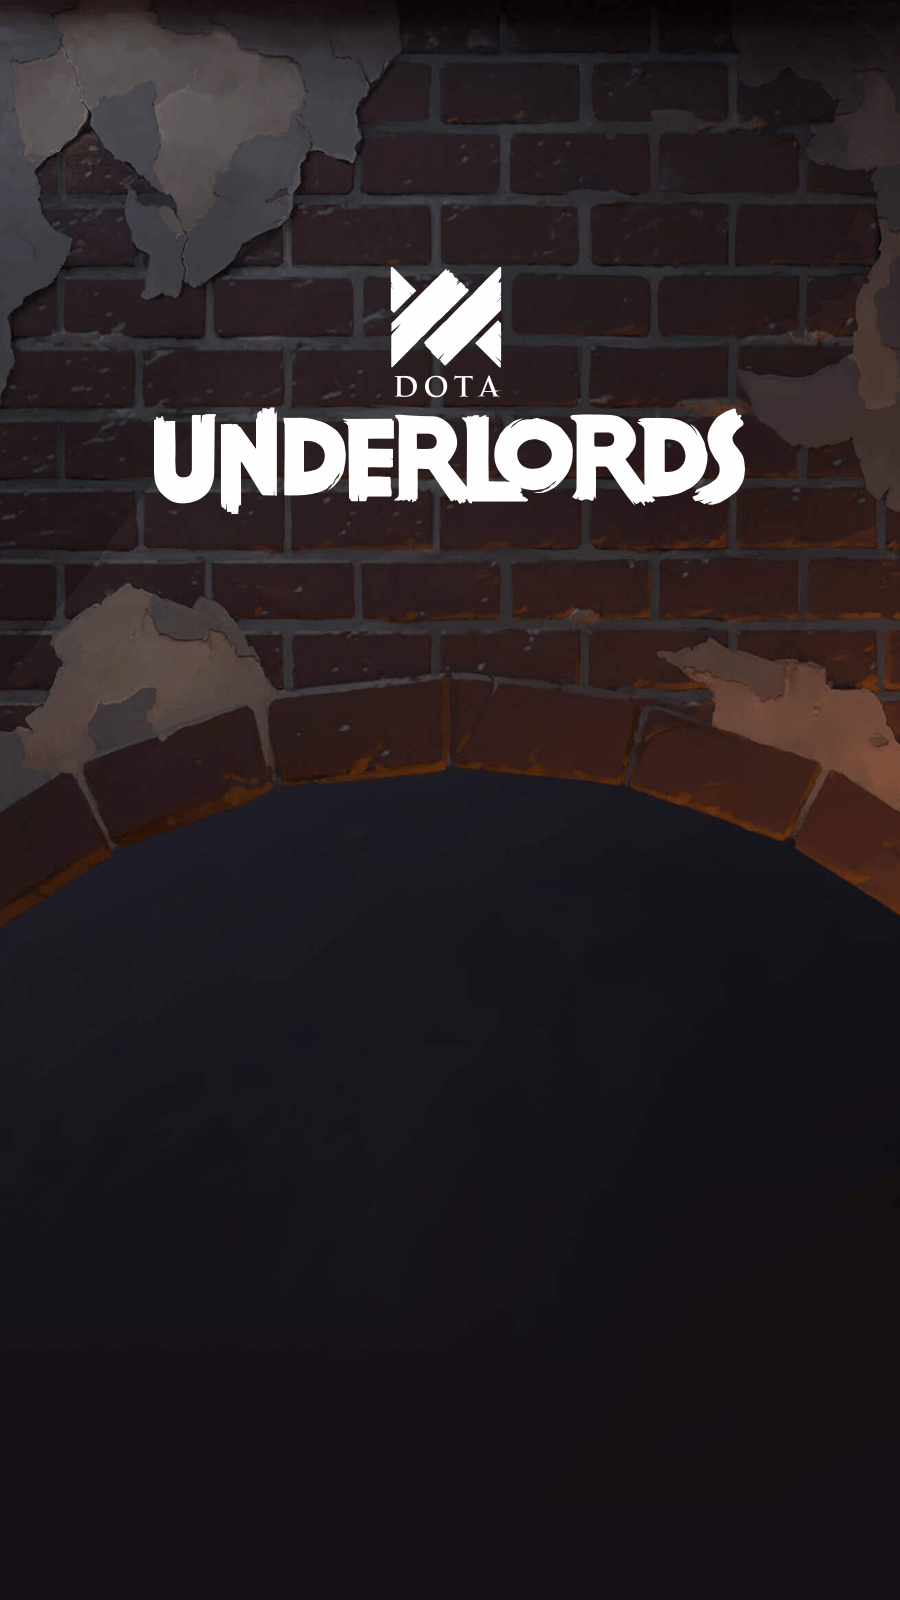 Dota Underlords Phone wallpaper for you all ♥ (1600x900)